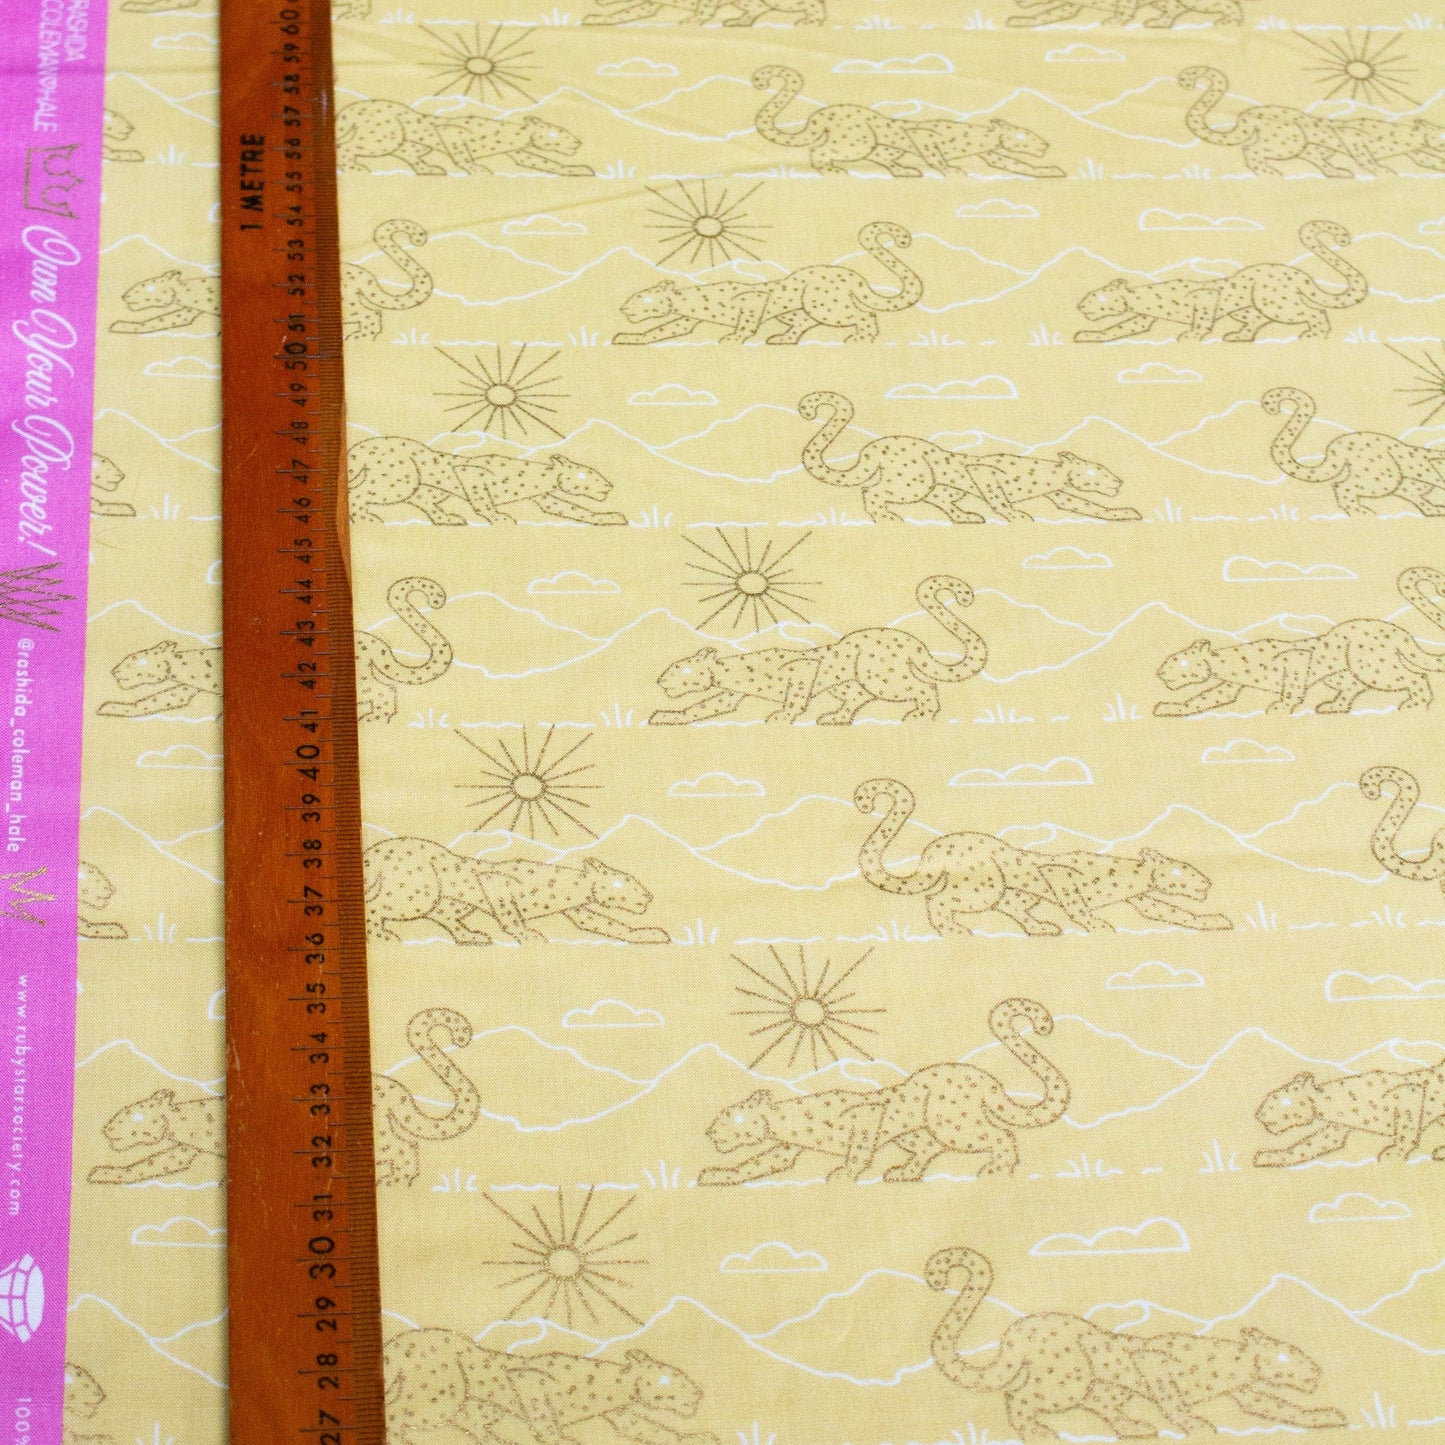 Ruby Star Society Quilting Cotton 'Aristocat' in Sand